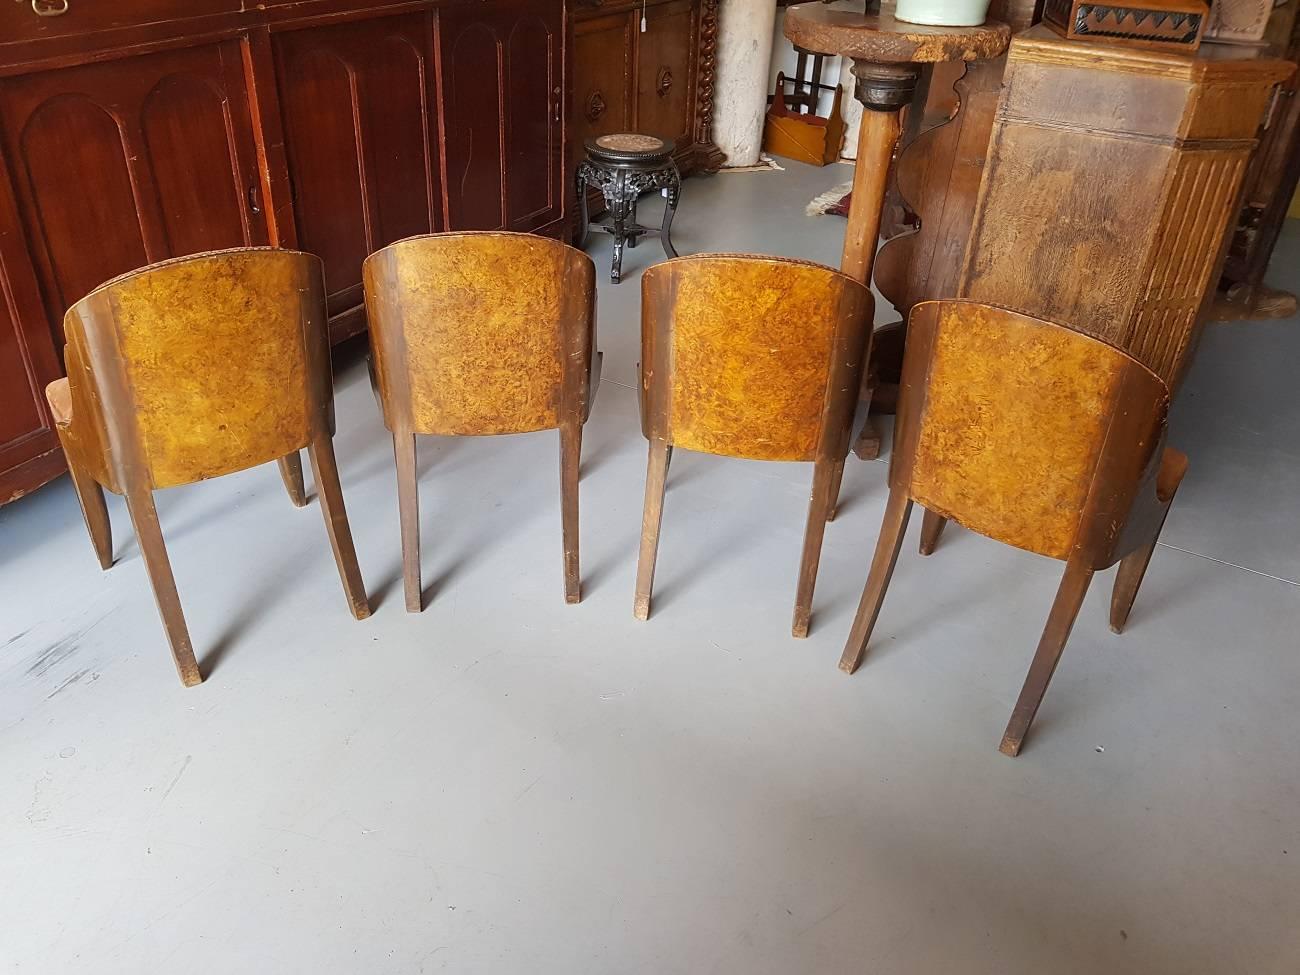 Set of four original and unrestored French Art Deco dining chairs from the 1920s-1930s with walnut veneered seat.

The measurements are,
Depth 52 cm/ 20.4 inch.
Width 46 cm/ 18.1 inch.
Height 82.5 cm/ 32.4 inch.
Seat height 46 cm/ 18.1 inch.
 